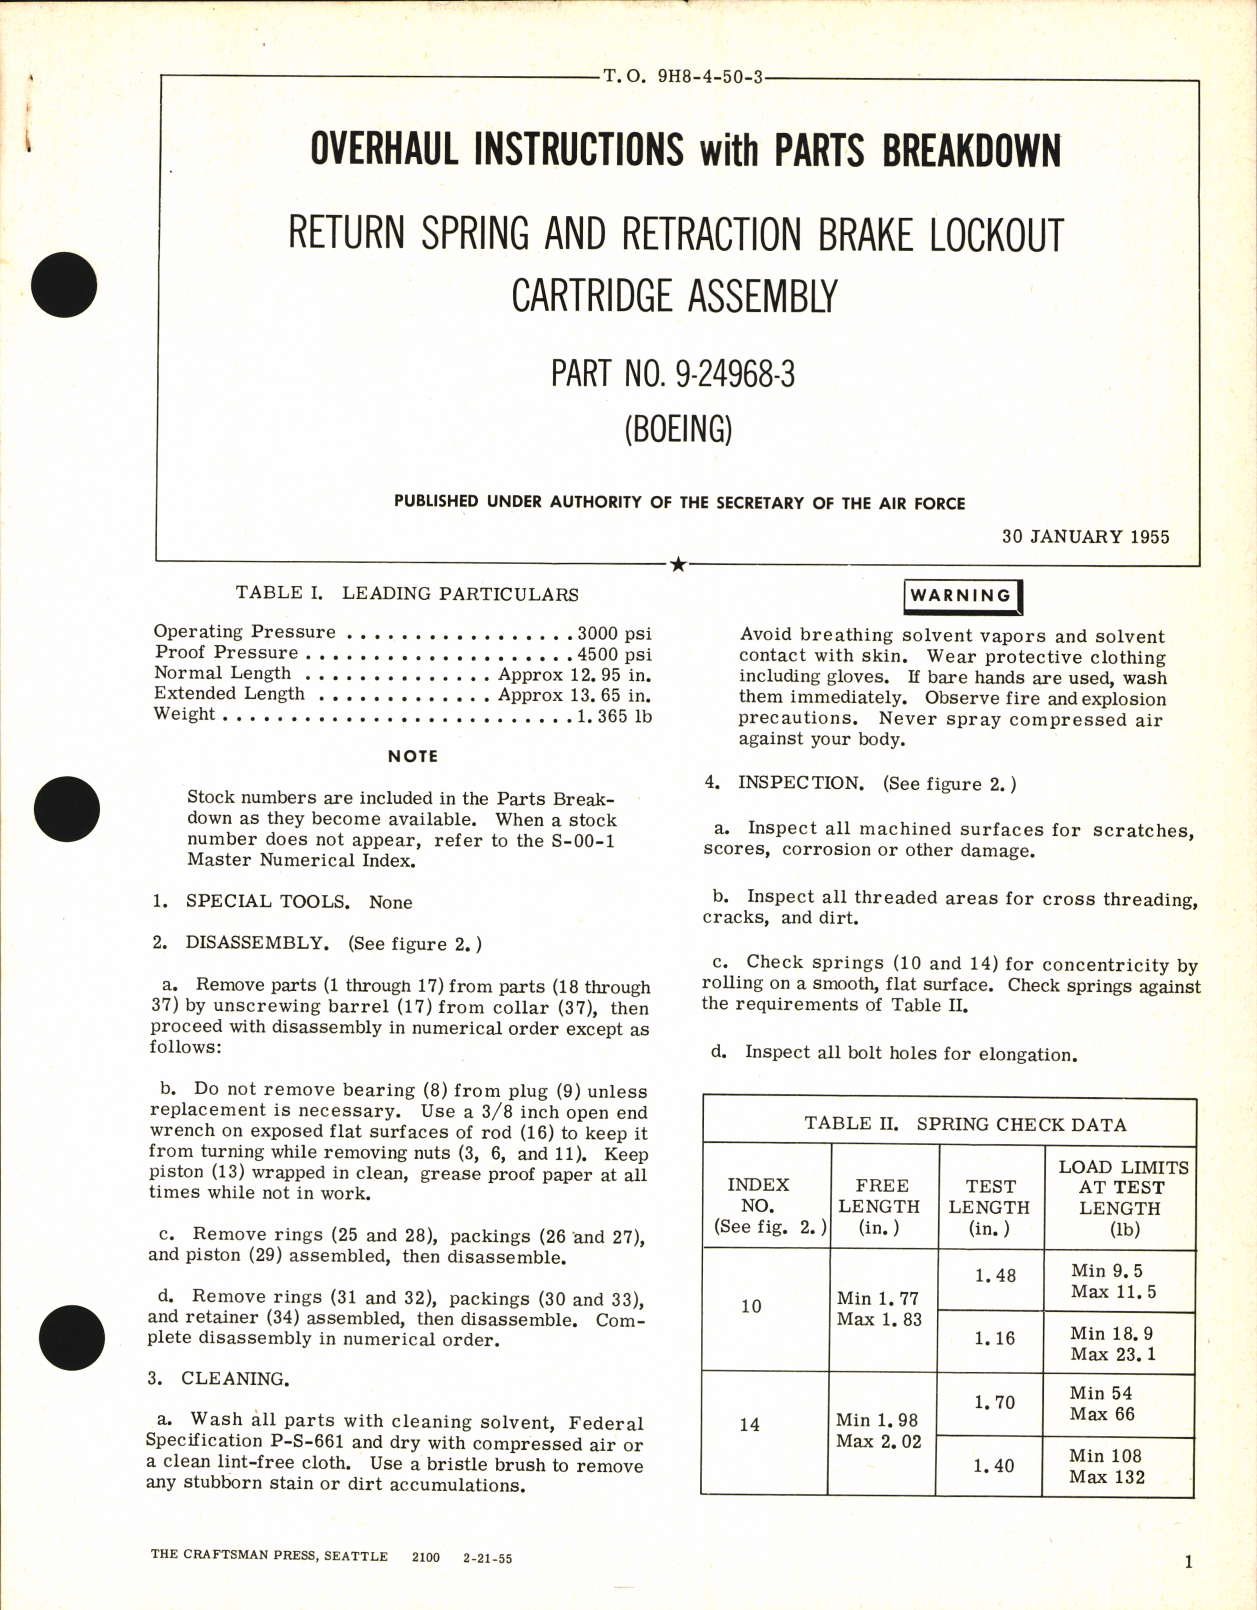 Sample page 1 from AirCorps Library document: Overhaul Instructions with Parts Breakdown for Return Spring and Retraction Brake Lockout Cartridge Assembly Part No. 9-24968-3